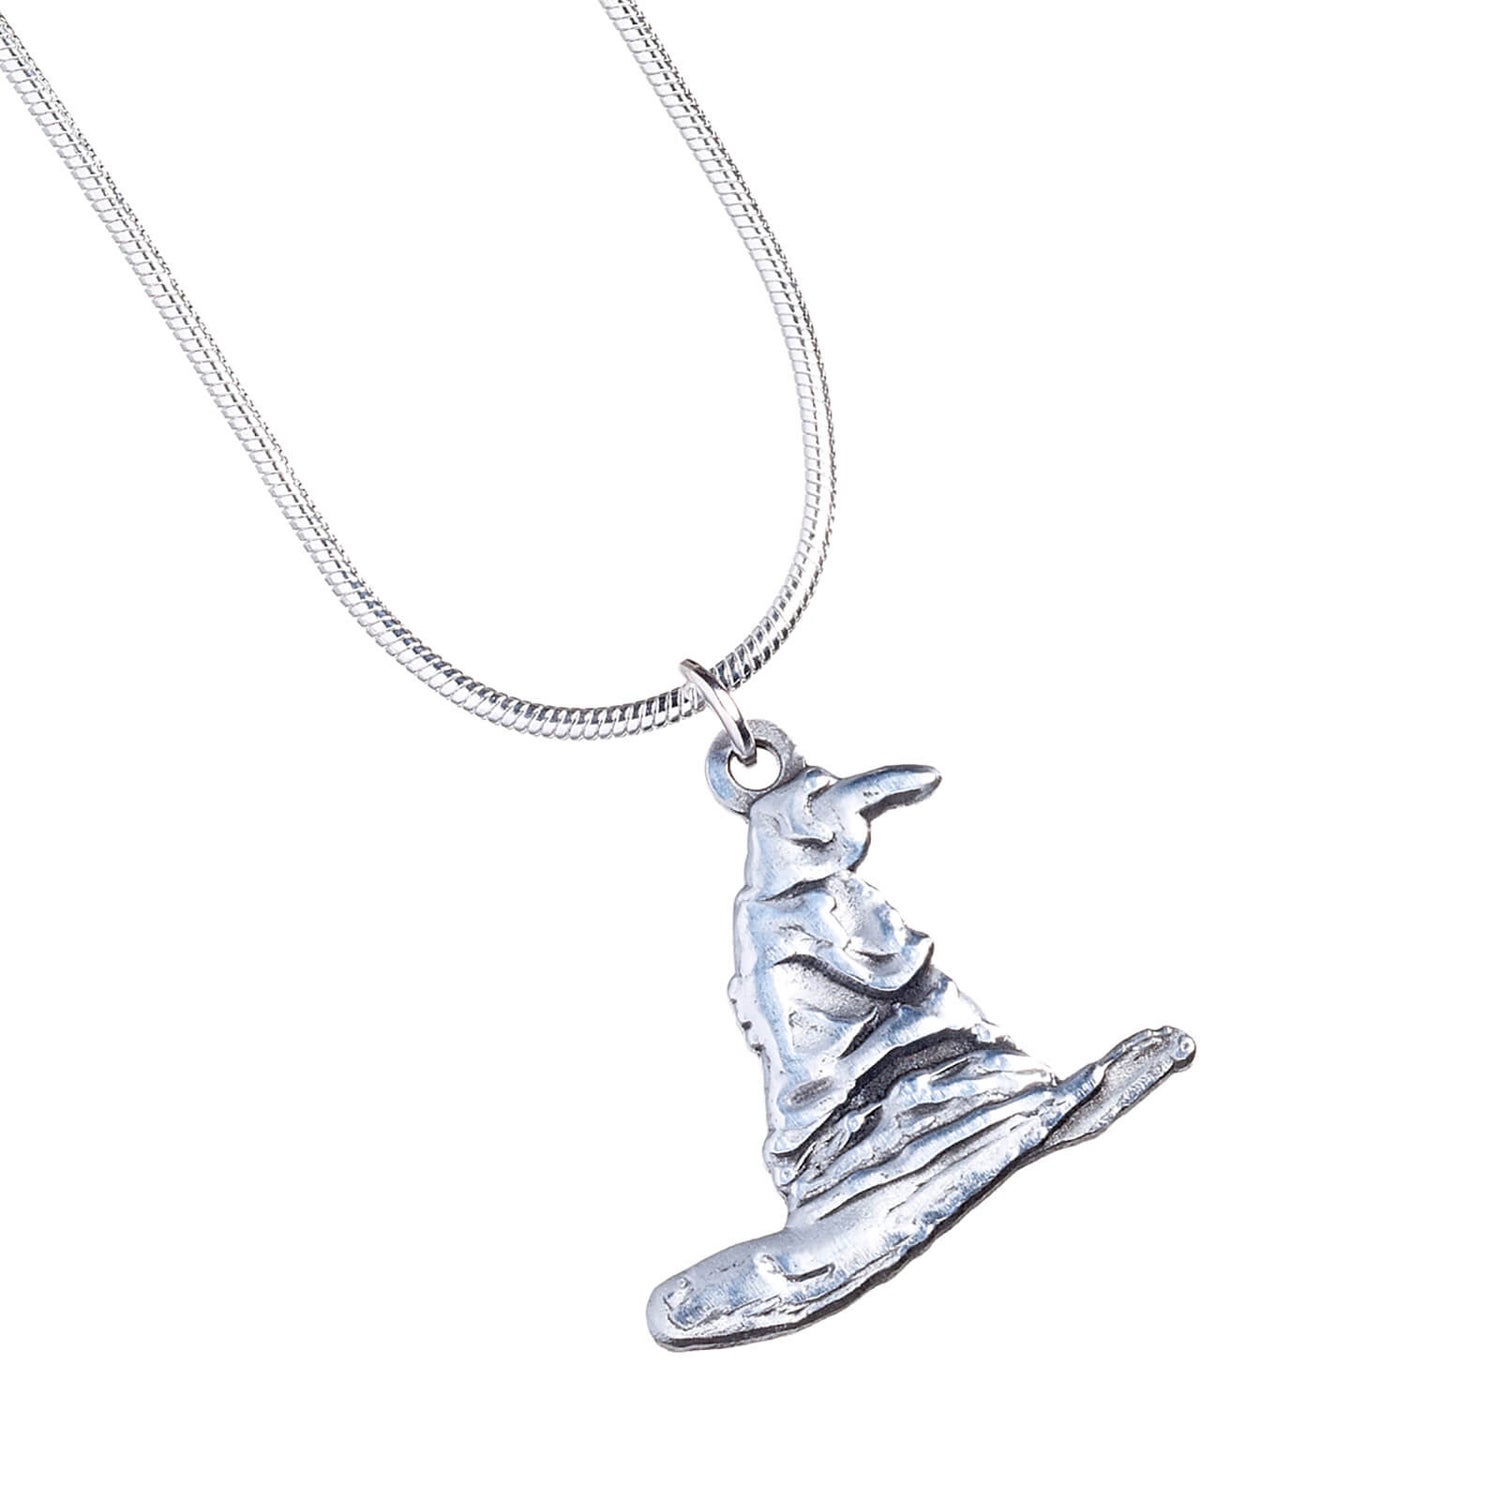 Harry Potter Sorting Hat Necklace - Silver